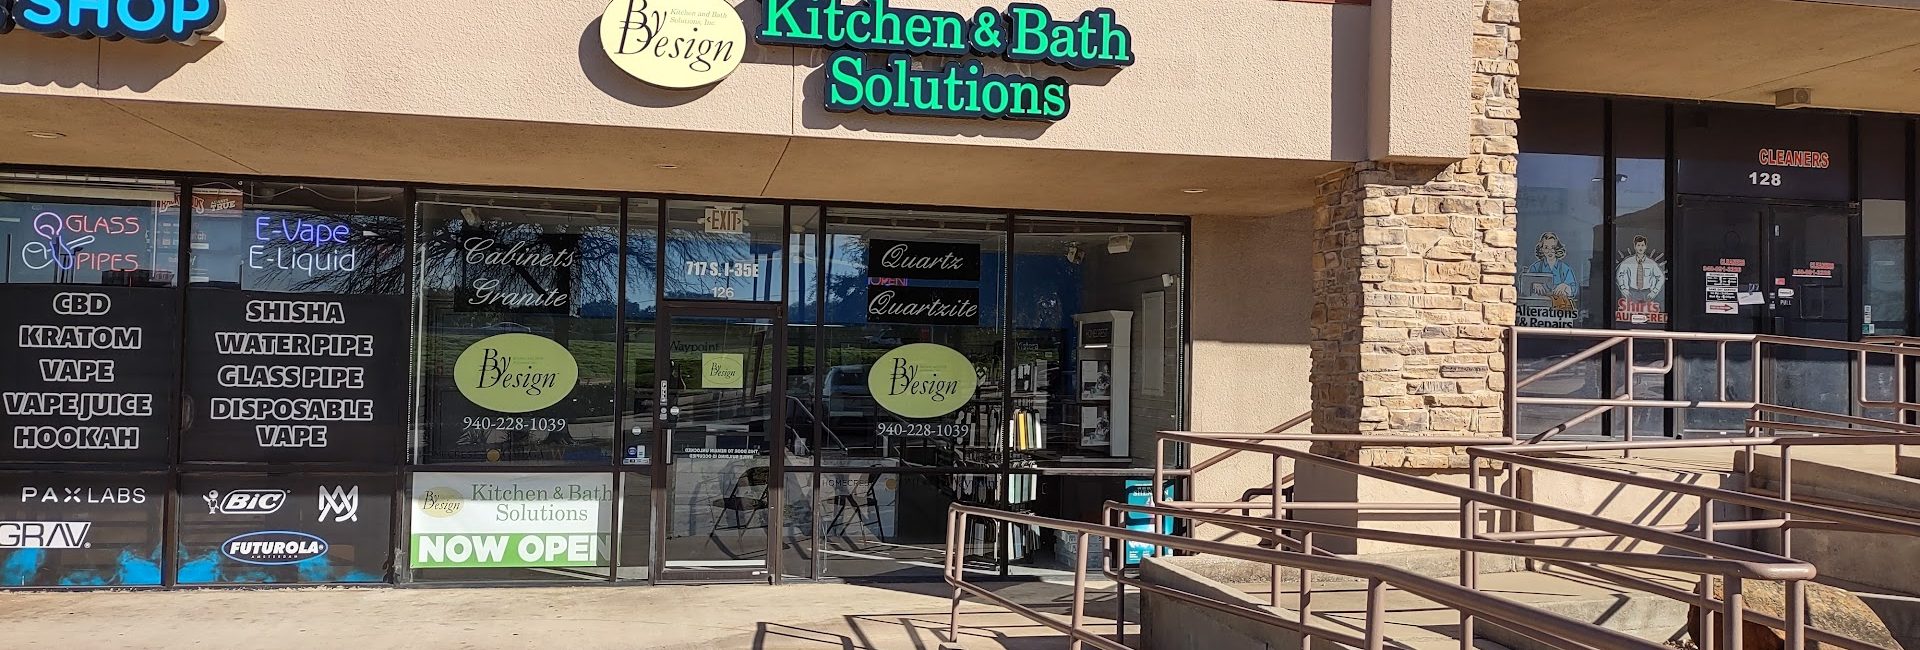 By Design Kitchen and Bath Solutions, Inc 6